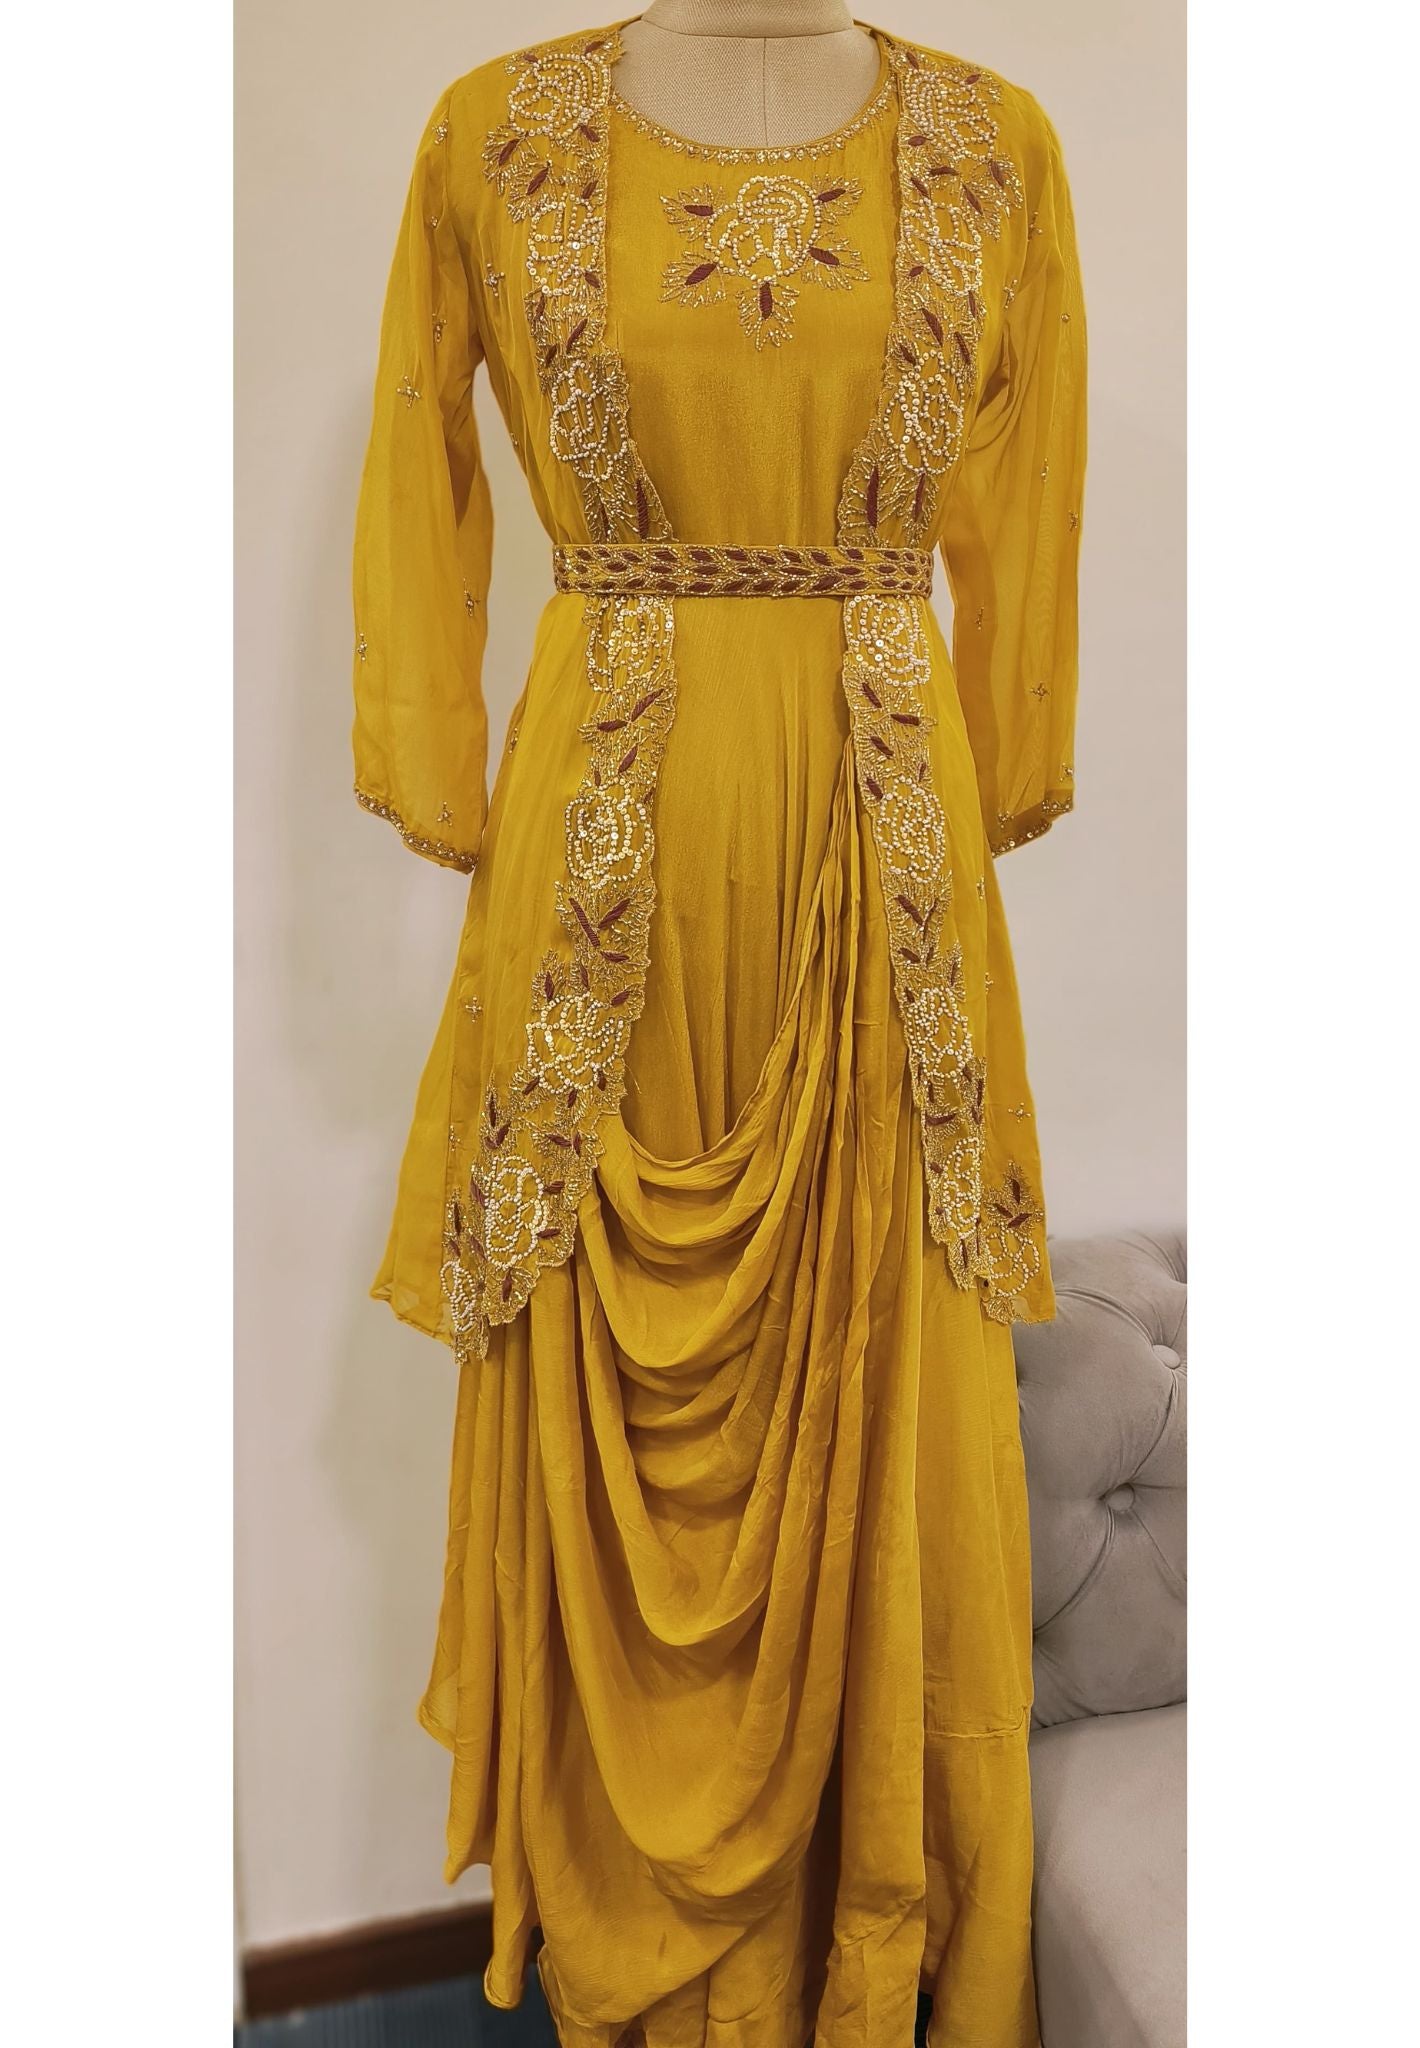 Party wear stylish drape style beautiful gown with cut dana embroidery jacket and belt DRY WASH ONLY-